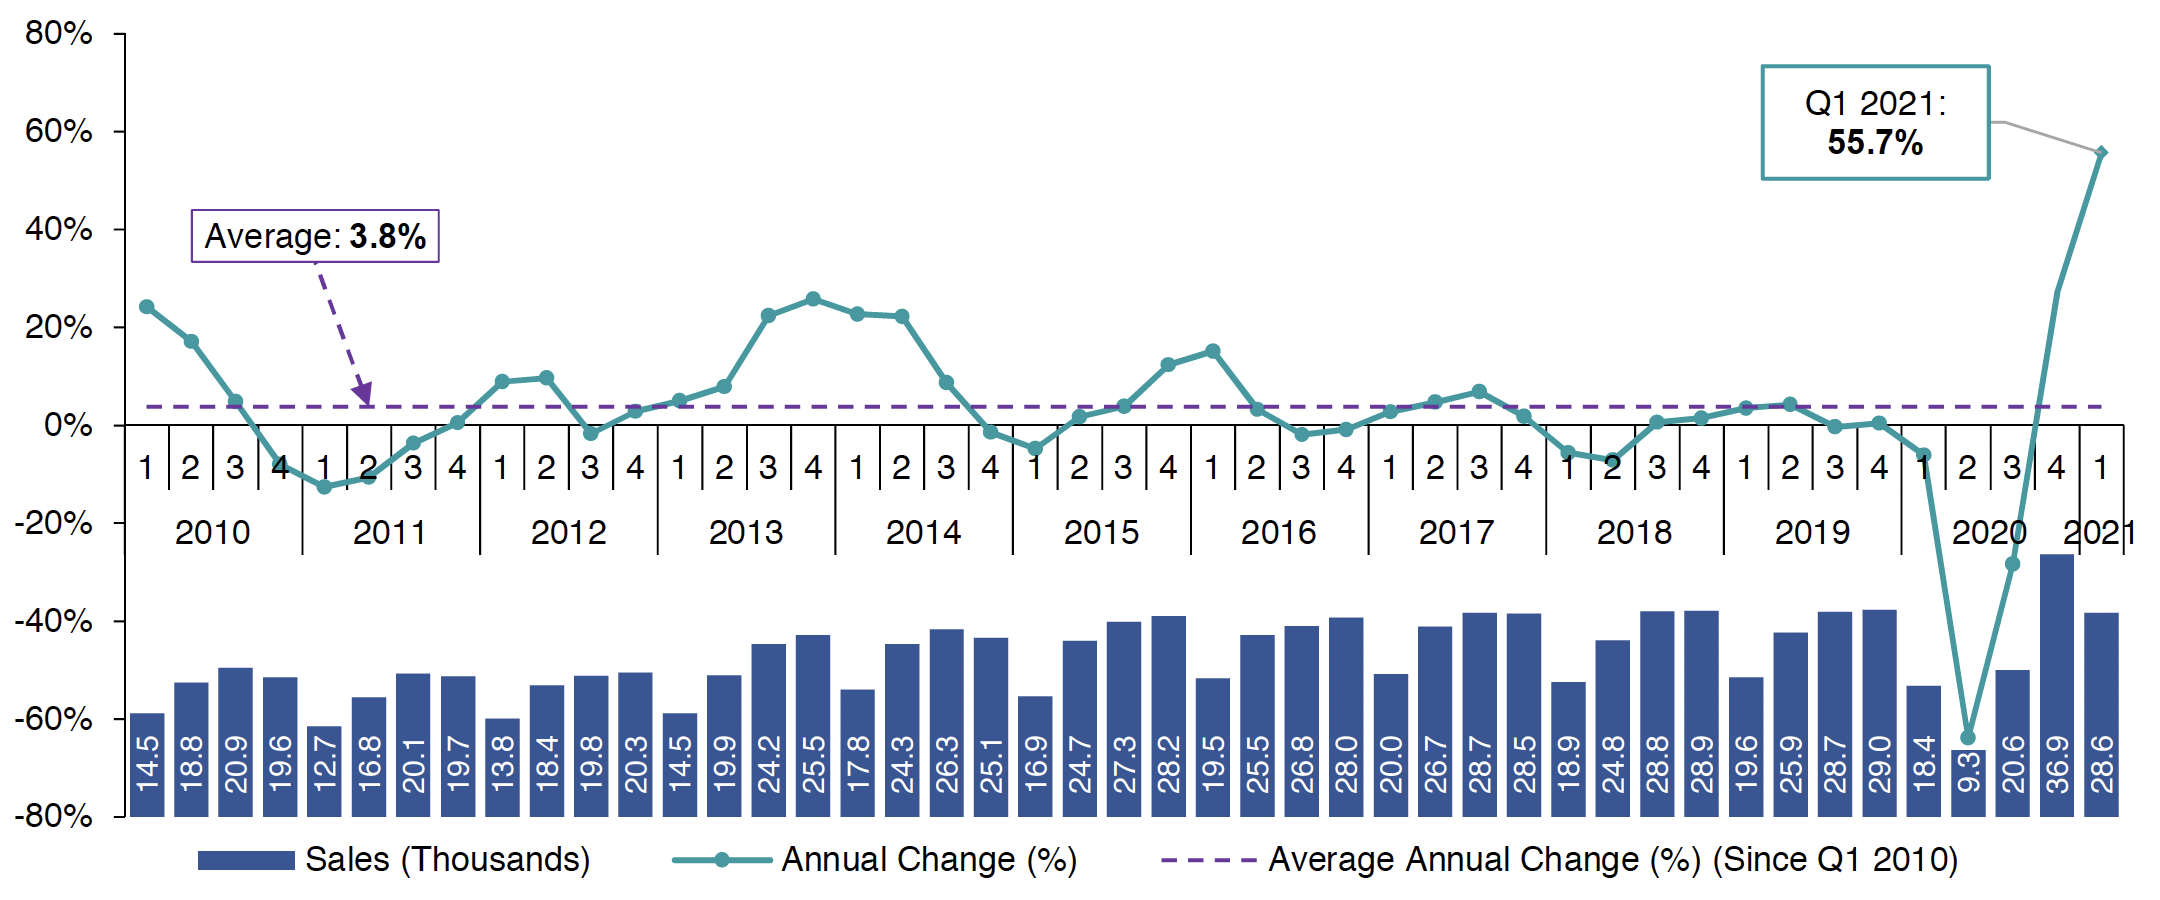 Chart 1.1 shows how the number of residential property sales registered with the Registers of Scotland has progressed on a quarterly basis from Q1 2010 to Q1 2021. The annual average increase in residential property sales registered is equal to 3.8% but in Q1 2021, 28,646 residential property sales were registered, an annual increase equal to 55.7%